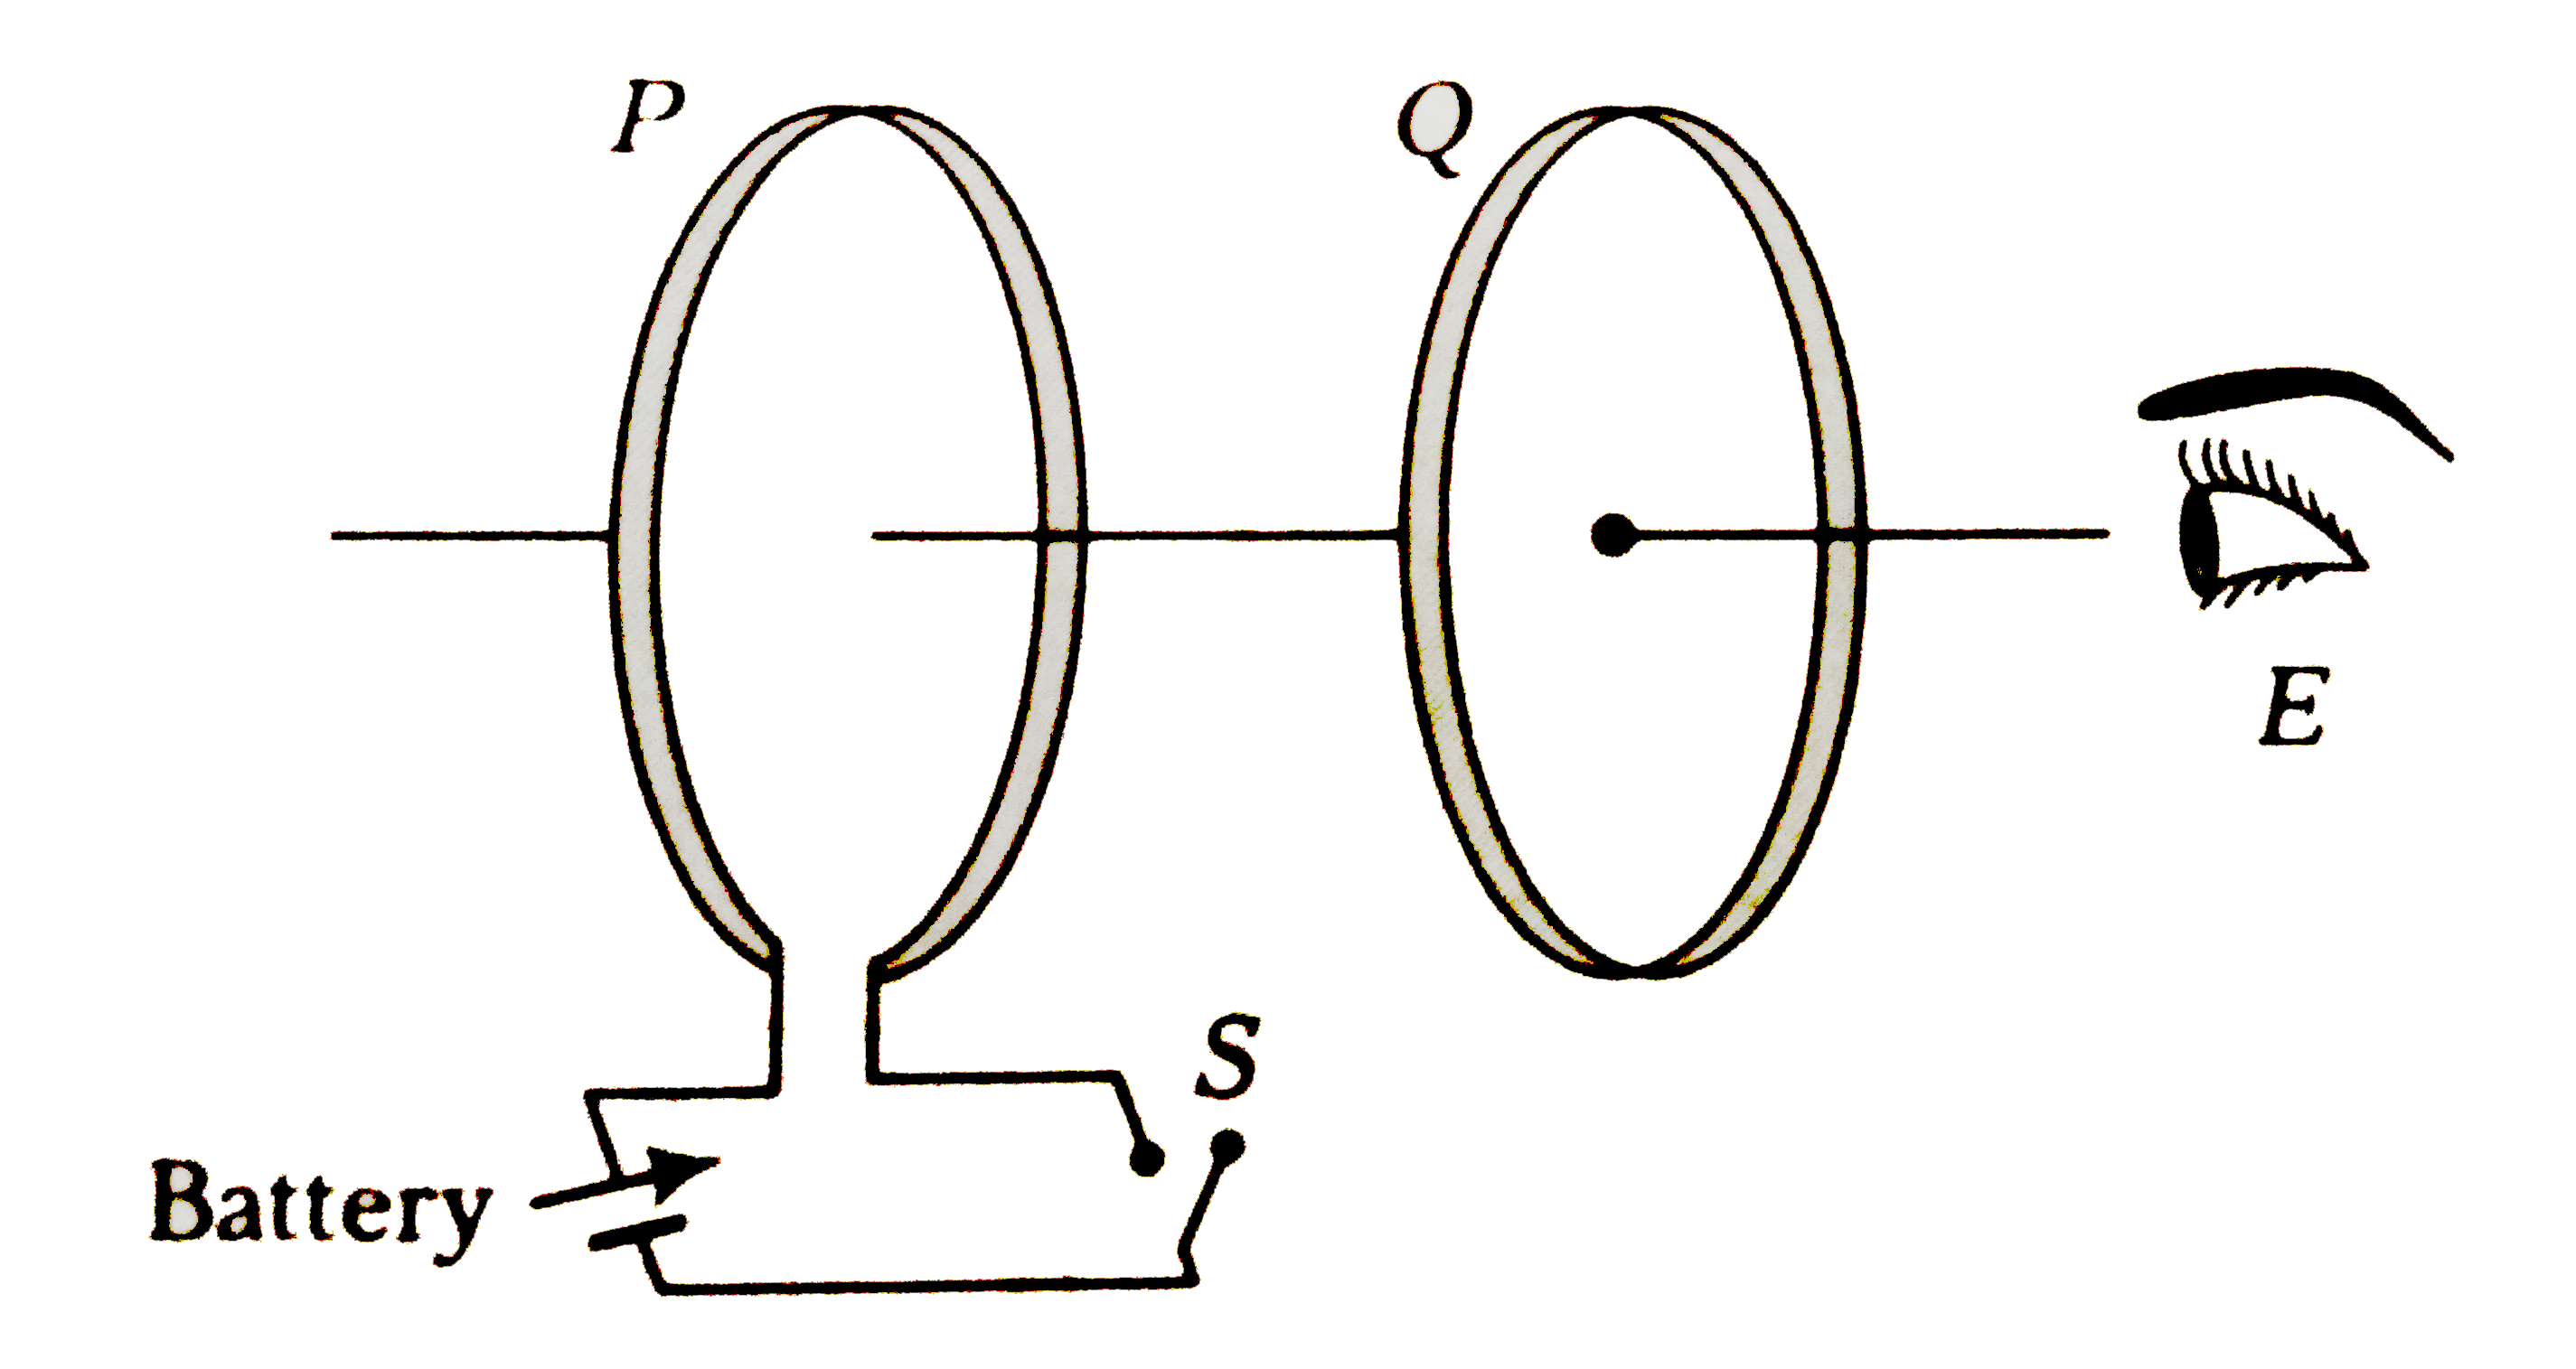 As shown in figure, P and Q are two co-axial conducting loops separated by some distance. When the switch S is closed, a clockwise current I(P) flows in P (as seen by E) and an induced current I(Q(1)) flows in Q. The switch remains closed for a long time. When S is opened, a current I(Q(2)) flows in Q.   Then, the directions of I(Q(1)) and I(Q(2)) (as seen by E) are